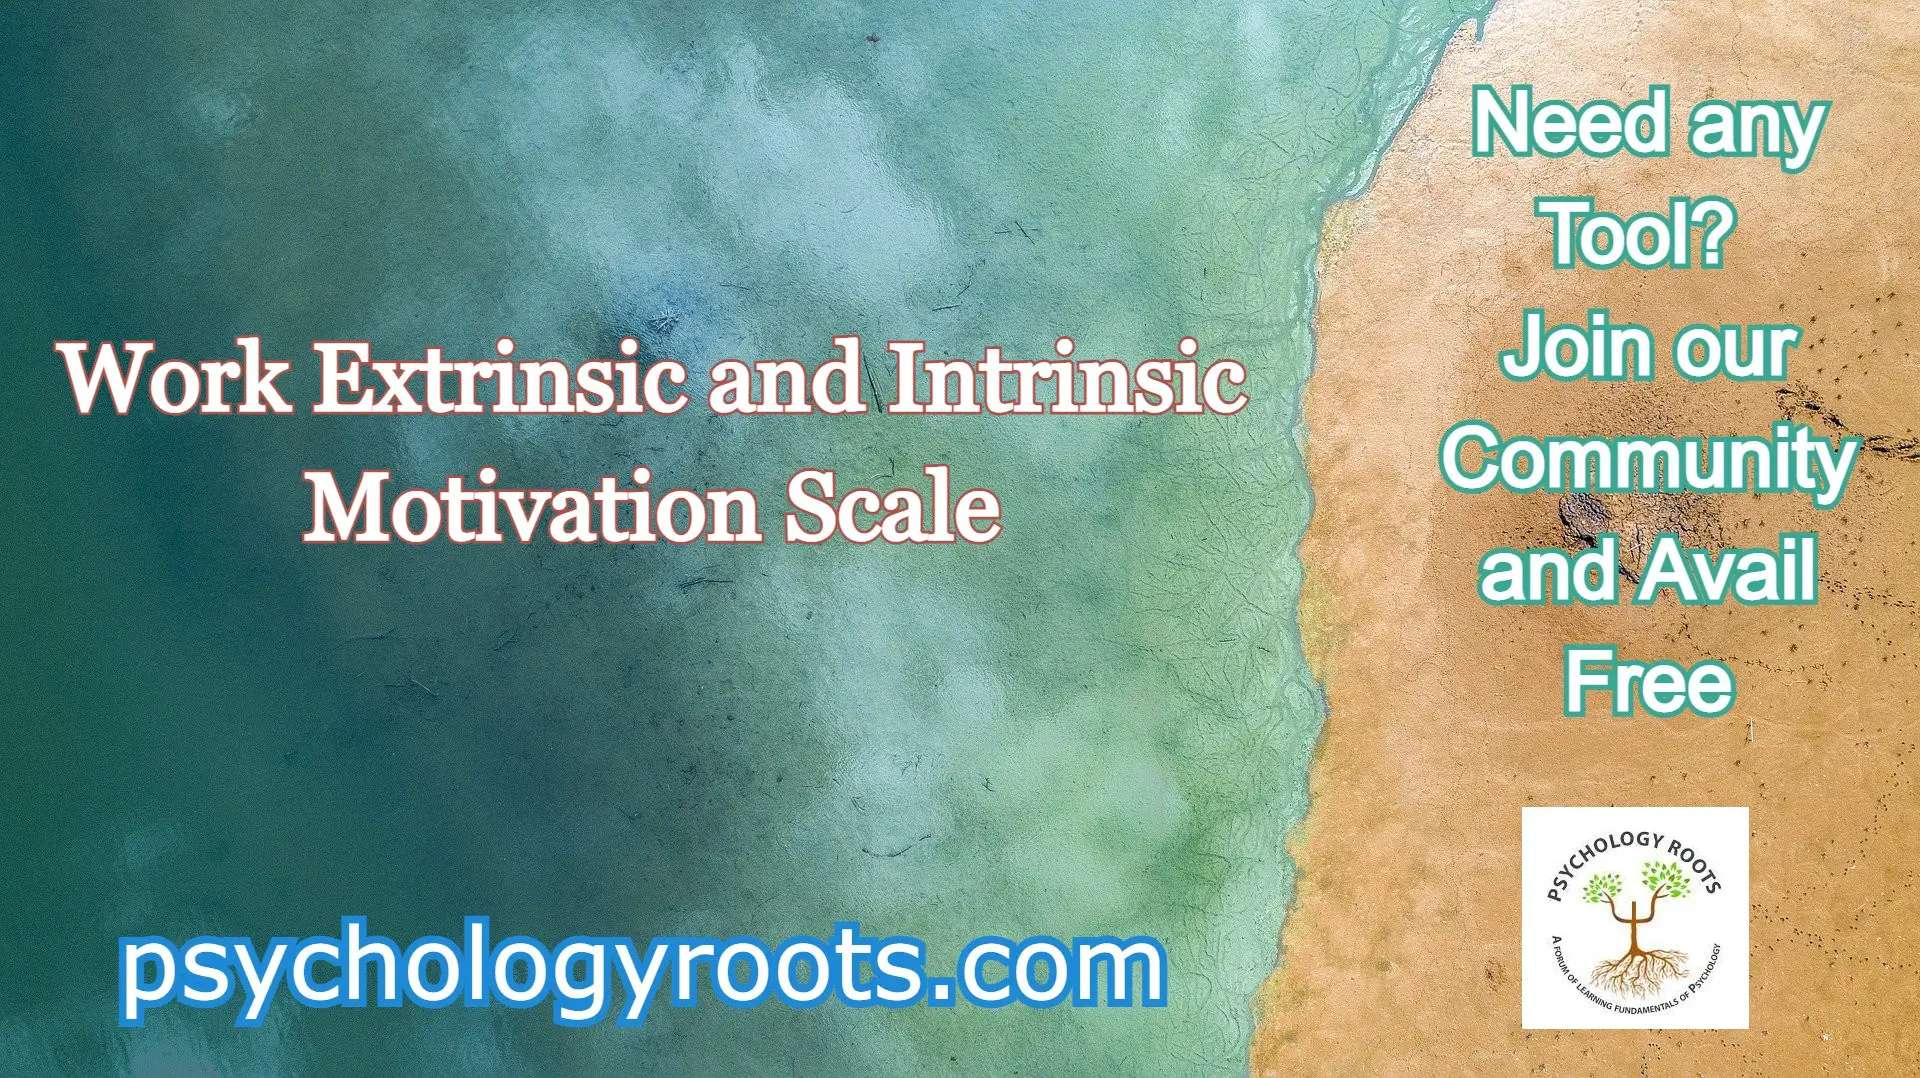 Work Extrinsic and Intrinsic Motivation Scale